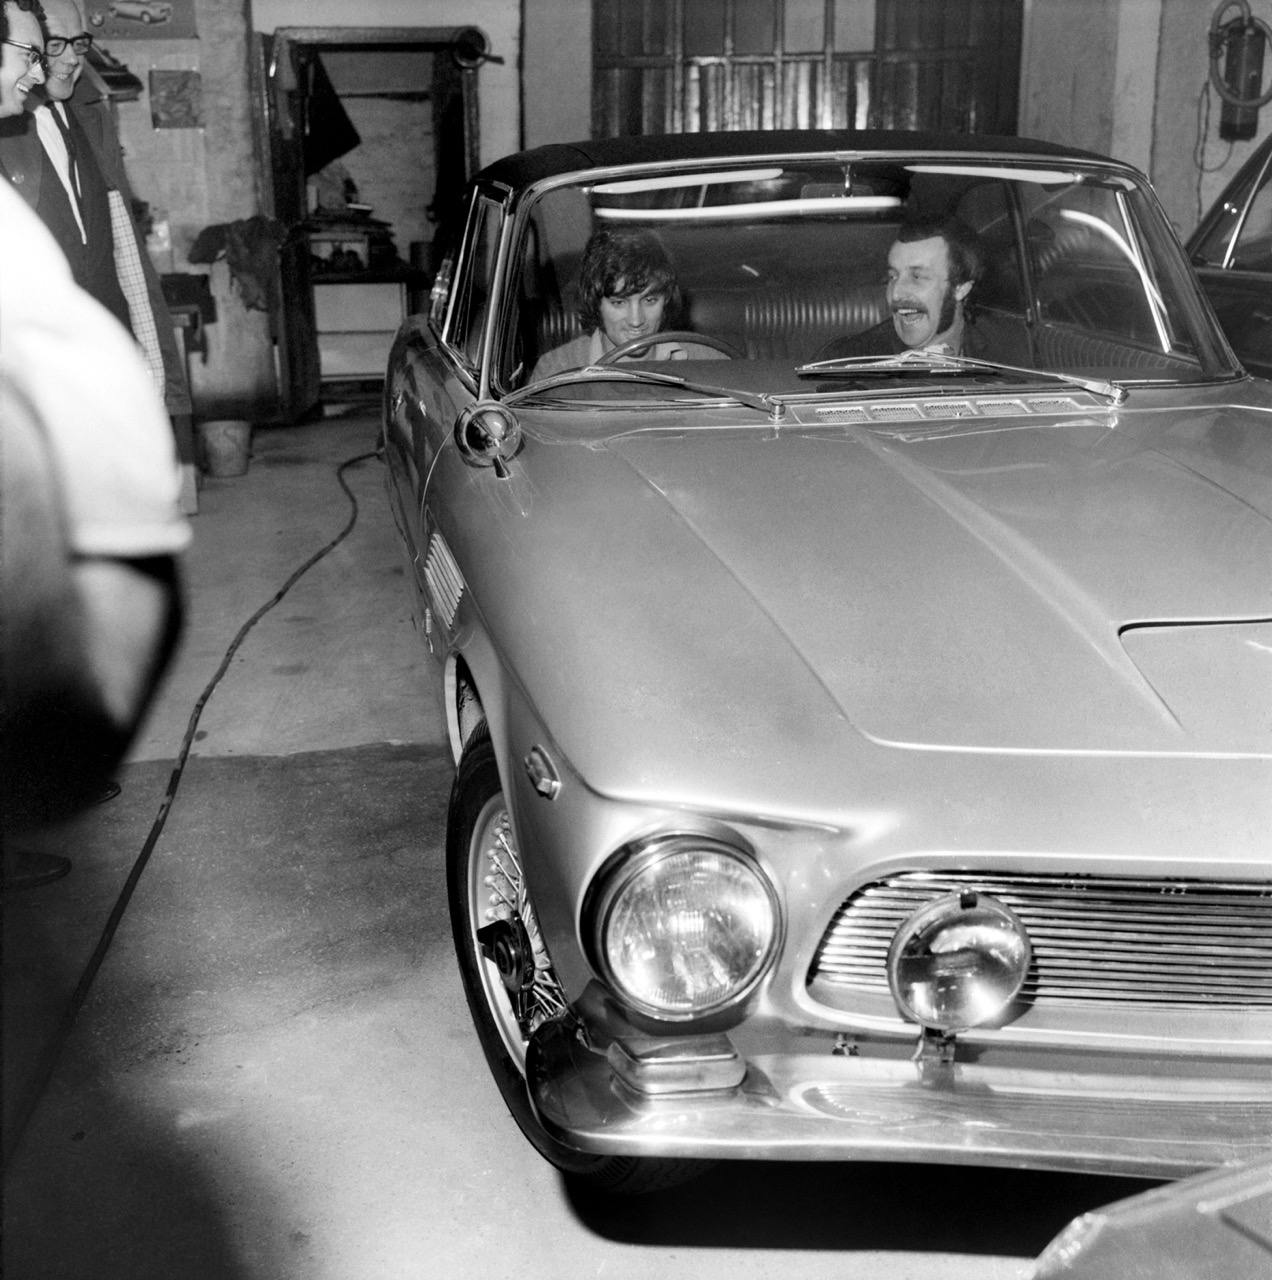 Manchester United star forward George Best picture with his latest car